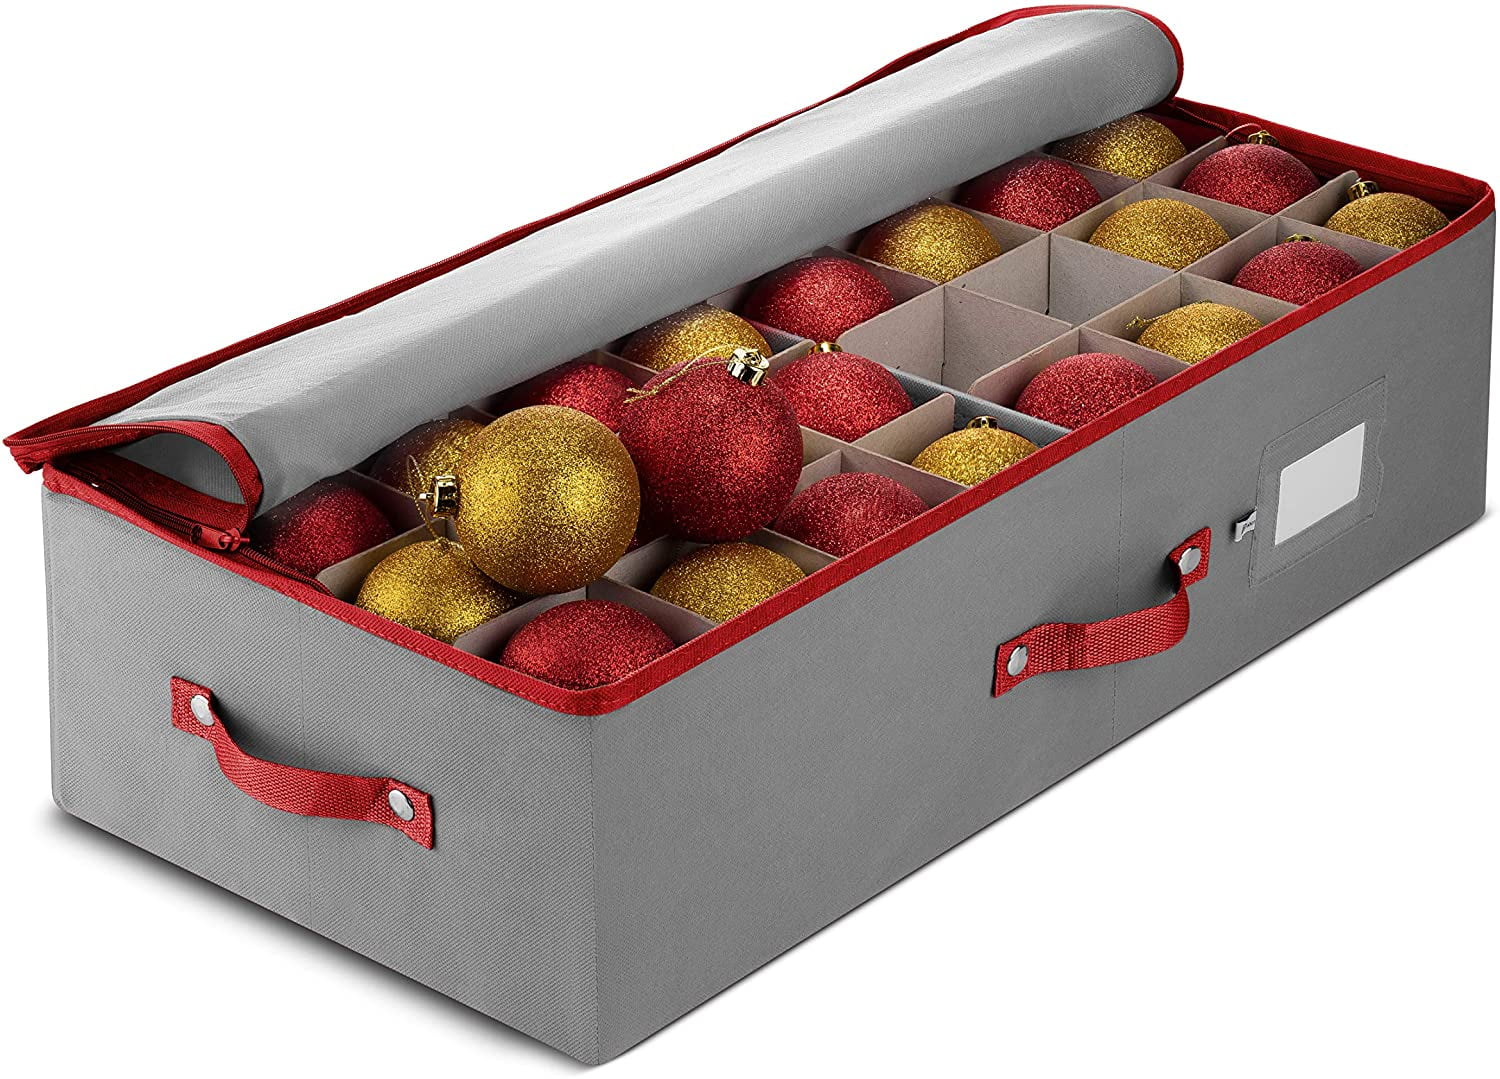  Primode Holiday Ornament Storage Chest, With 4 Trays Holds Up  to 64 Ornaments Balls, With Dividers (Gray) : Home & Kitchen